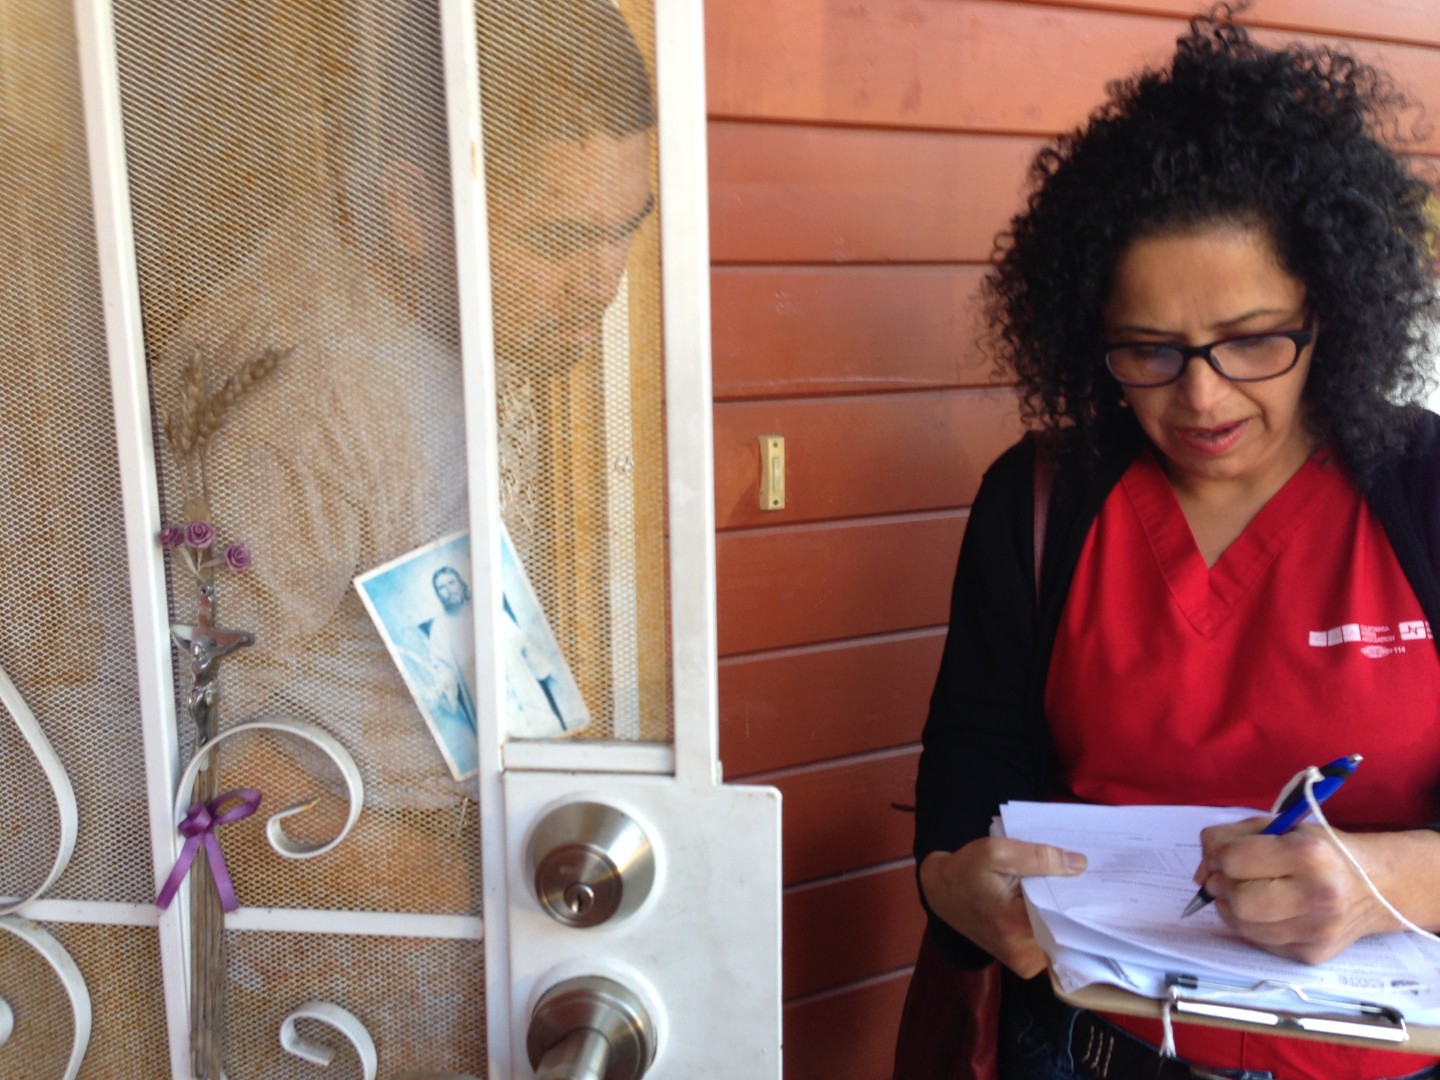 Maria Sahagun with the California Nurses Association is surveying the health of residents in Richmond's Parchester Village. (Julie Small/KQED)